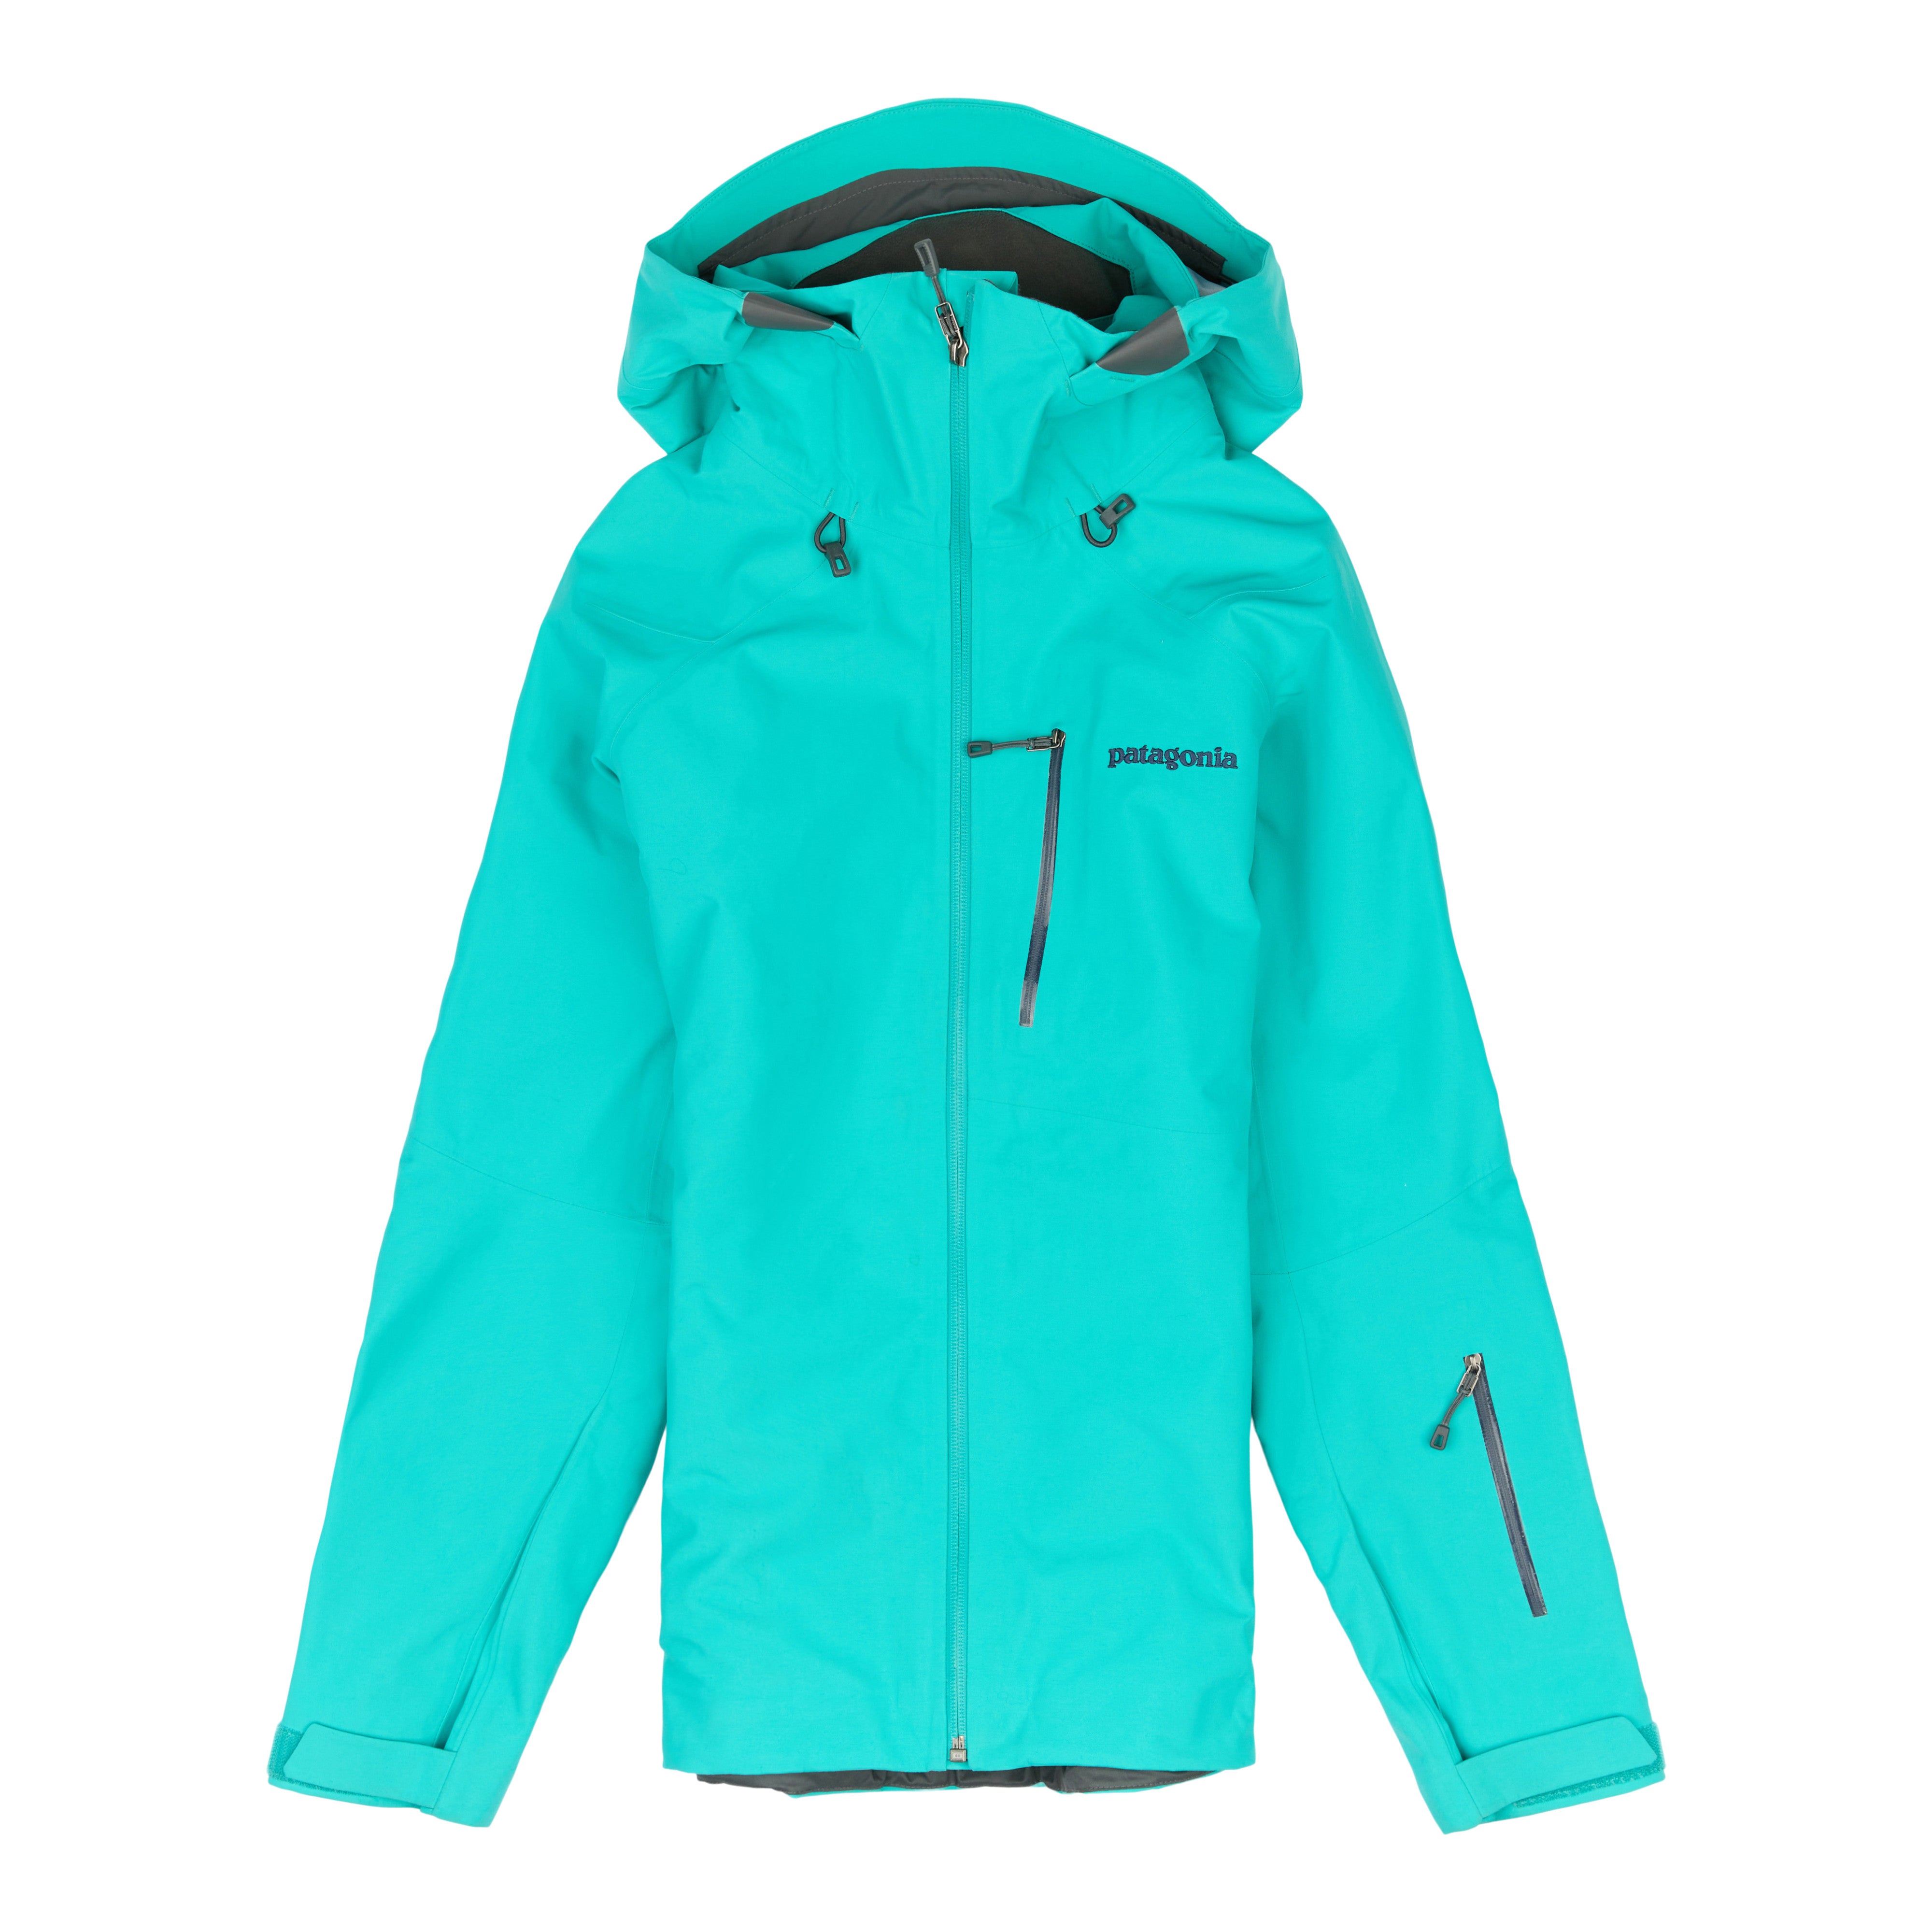 Patagonia Women's Jackets for sale in Dallas, Texas